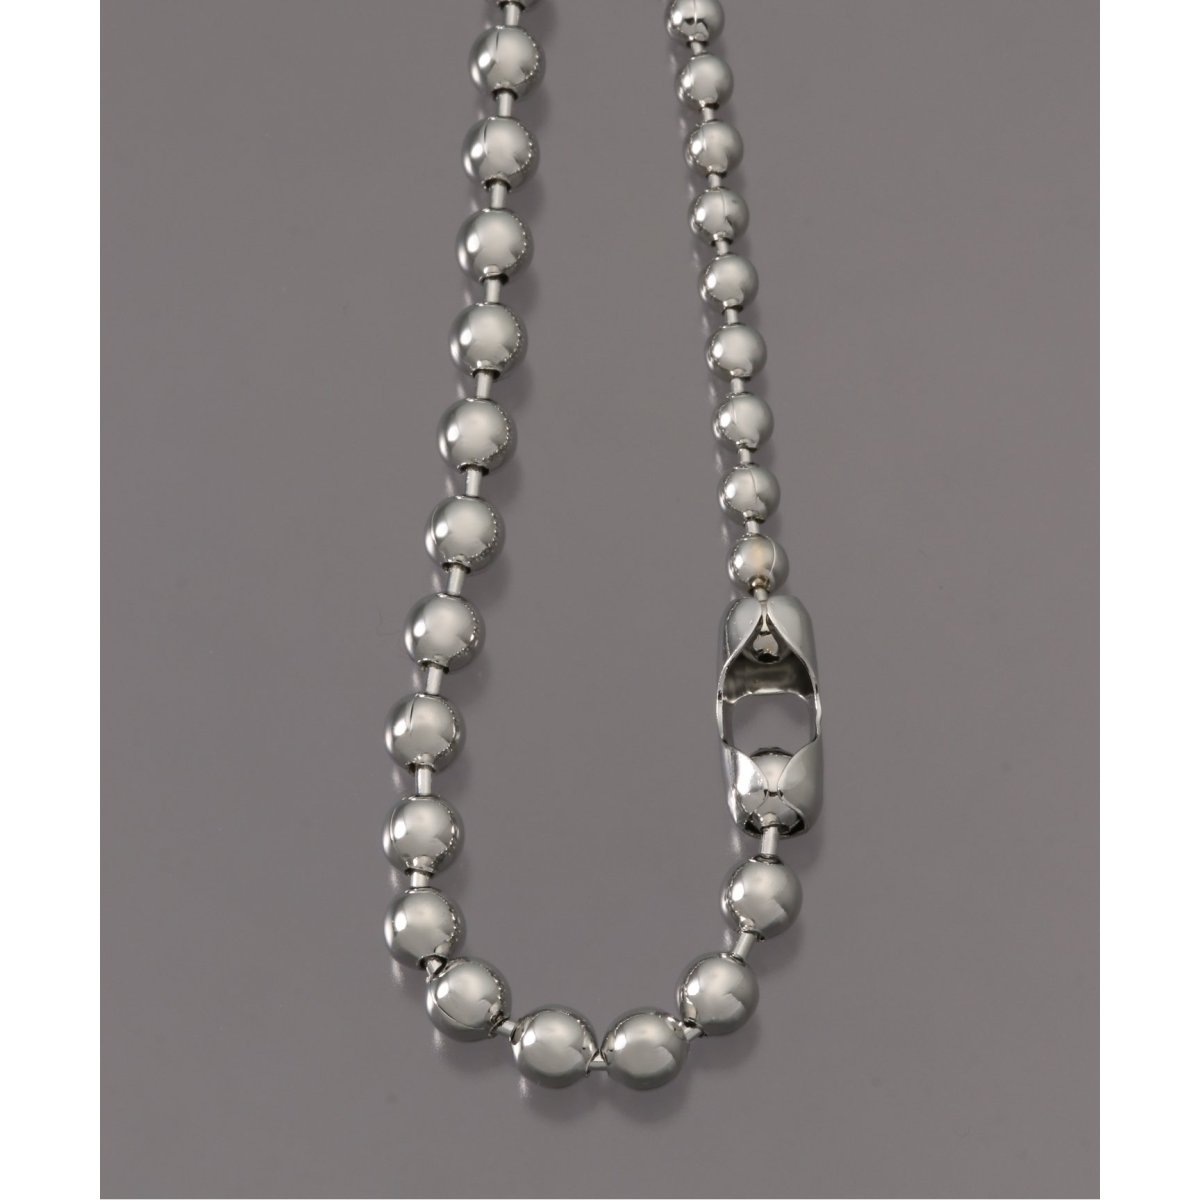 JIEDA SWITCHING BALL CHAIN NECKLACE